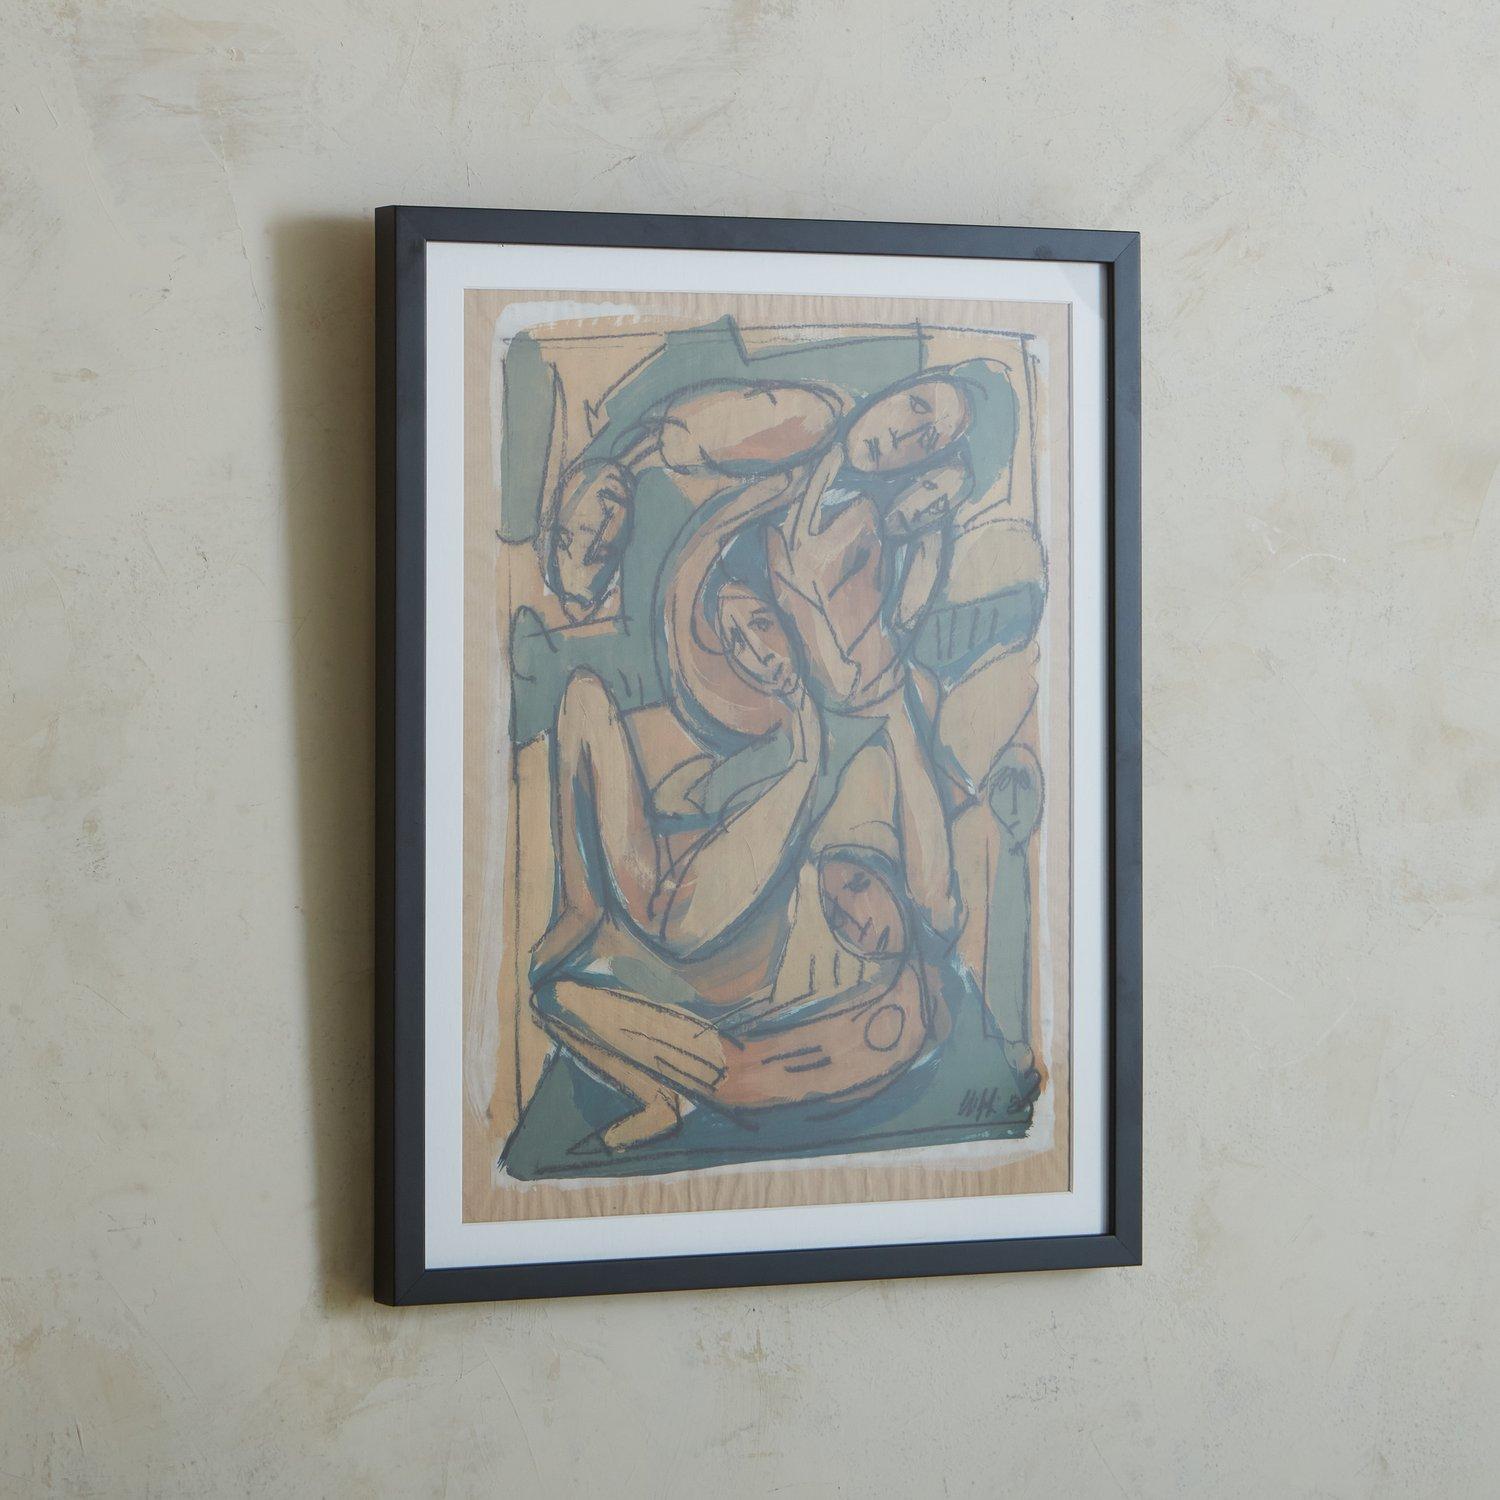 Modern Framed Mixed Media Abstract on Paper #24 by Alessandra Chiffi For Sale